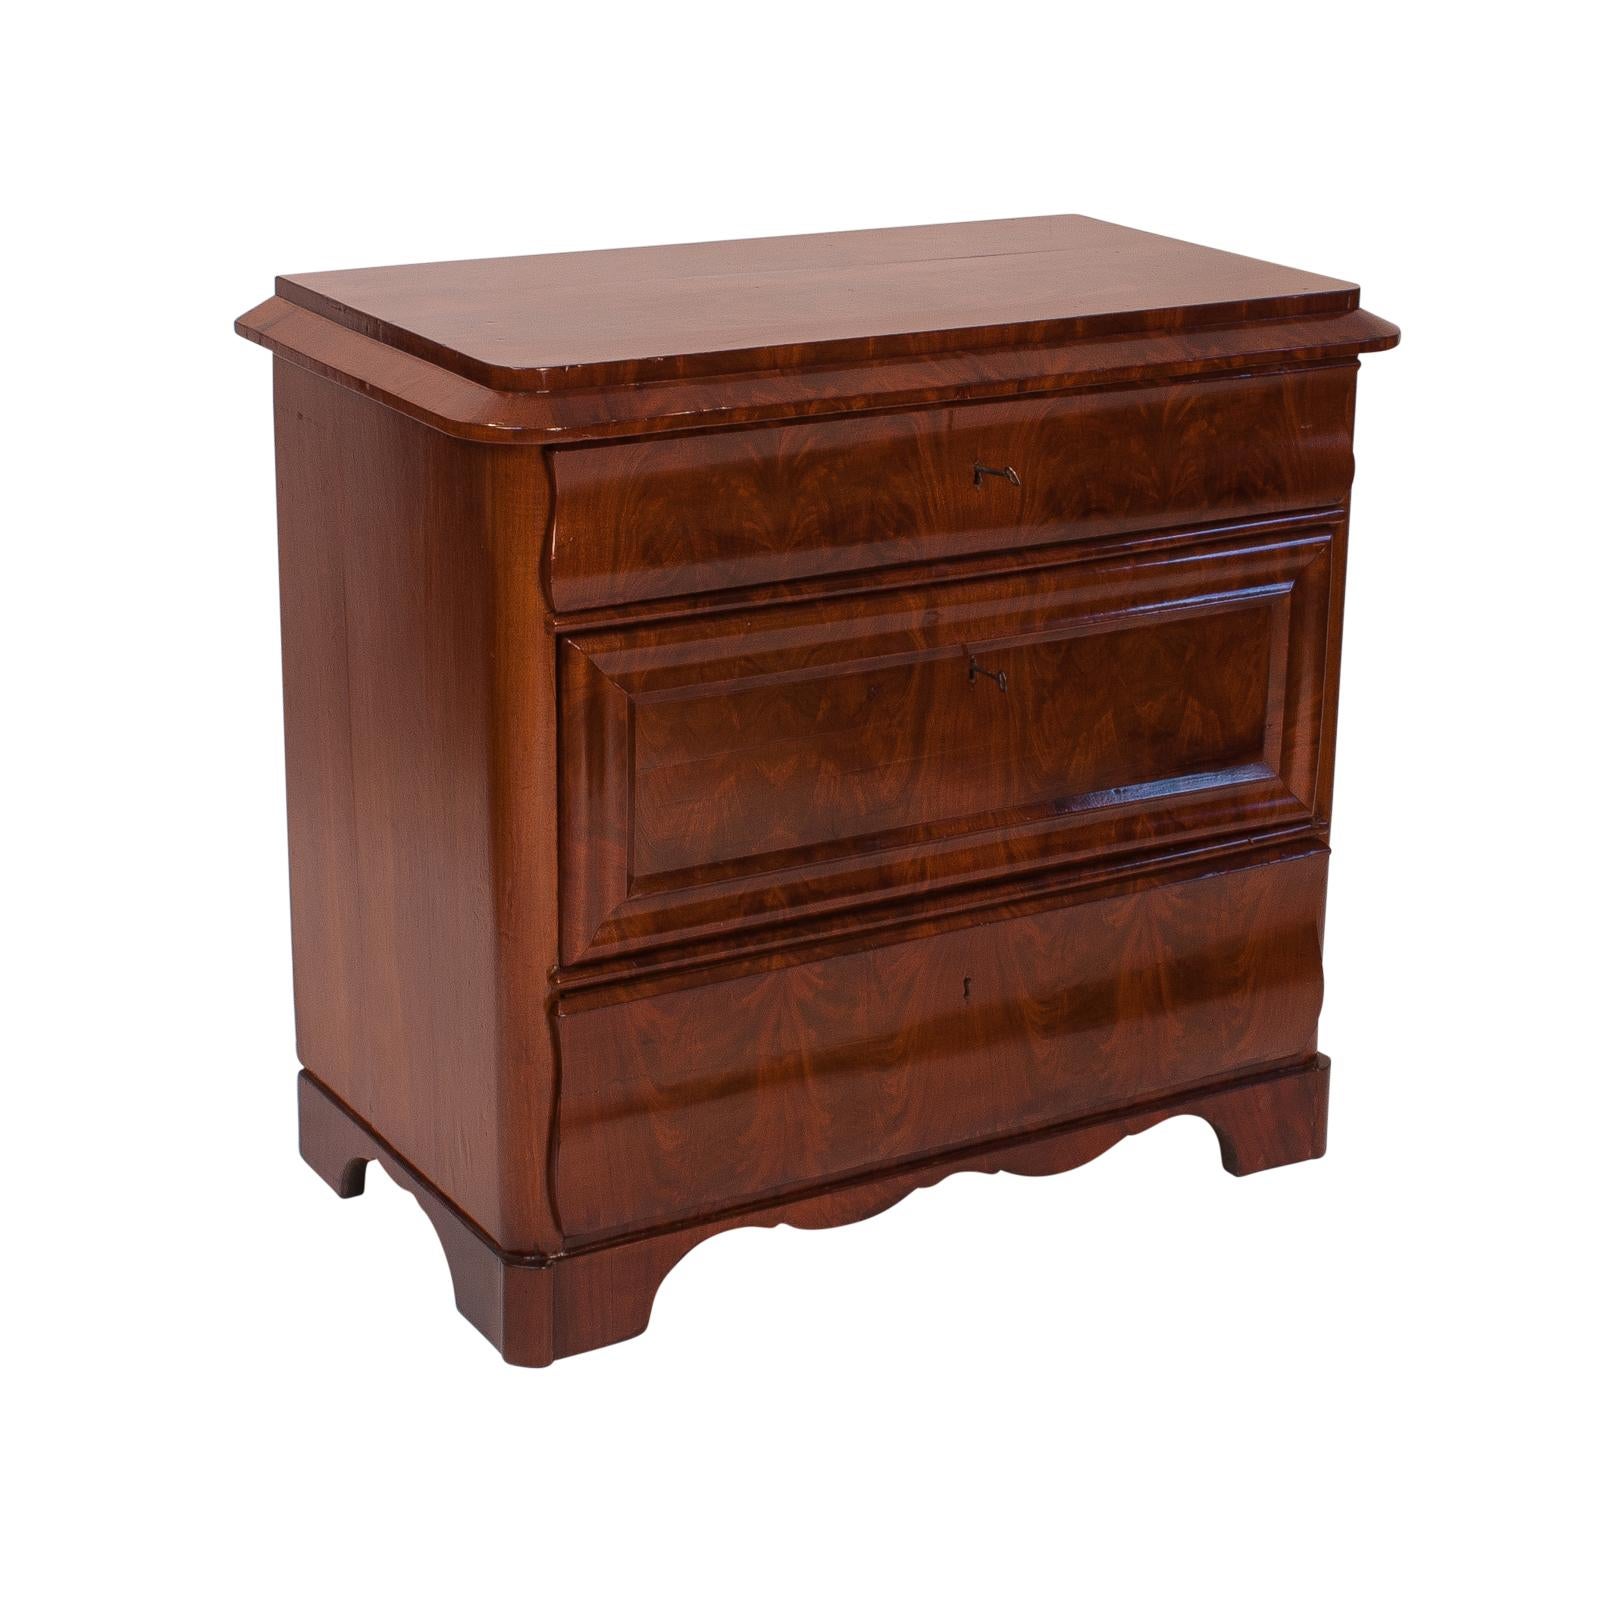 An early 19th century Danish mahogany 3-drawer chest of drawers, circa 1830 with well matched flame mahogany veneers.